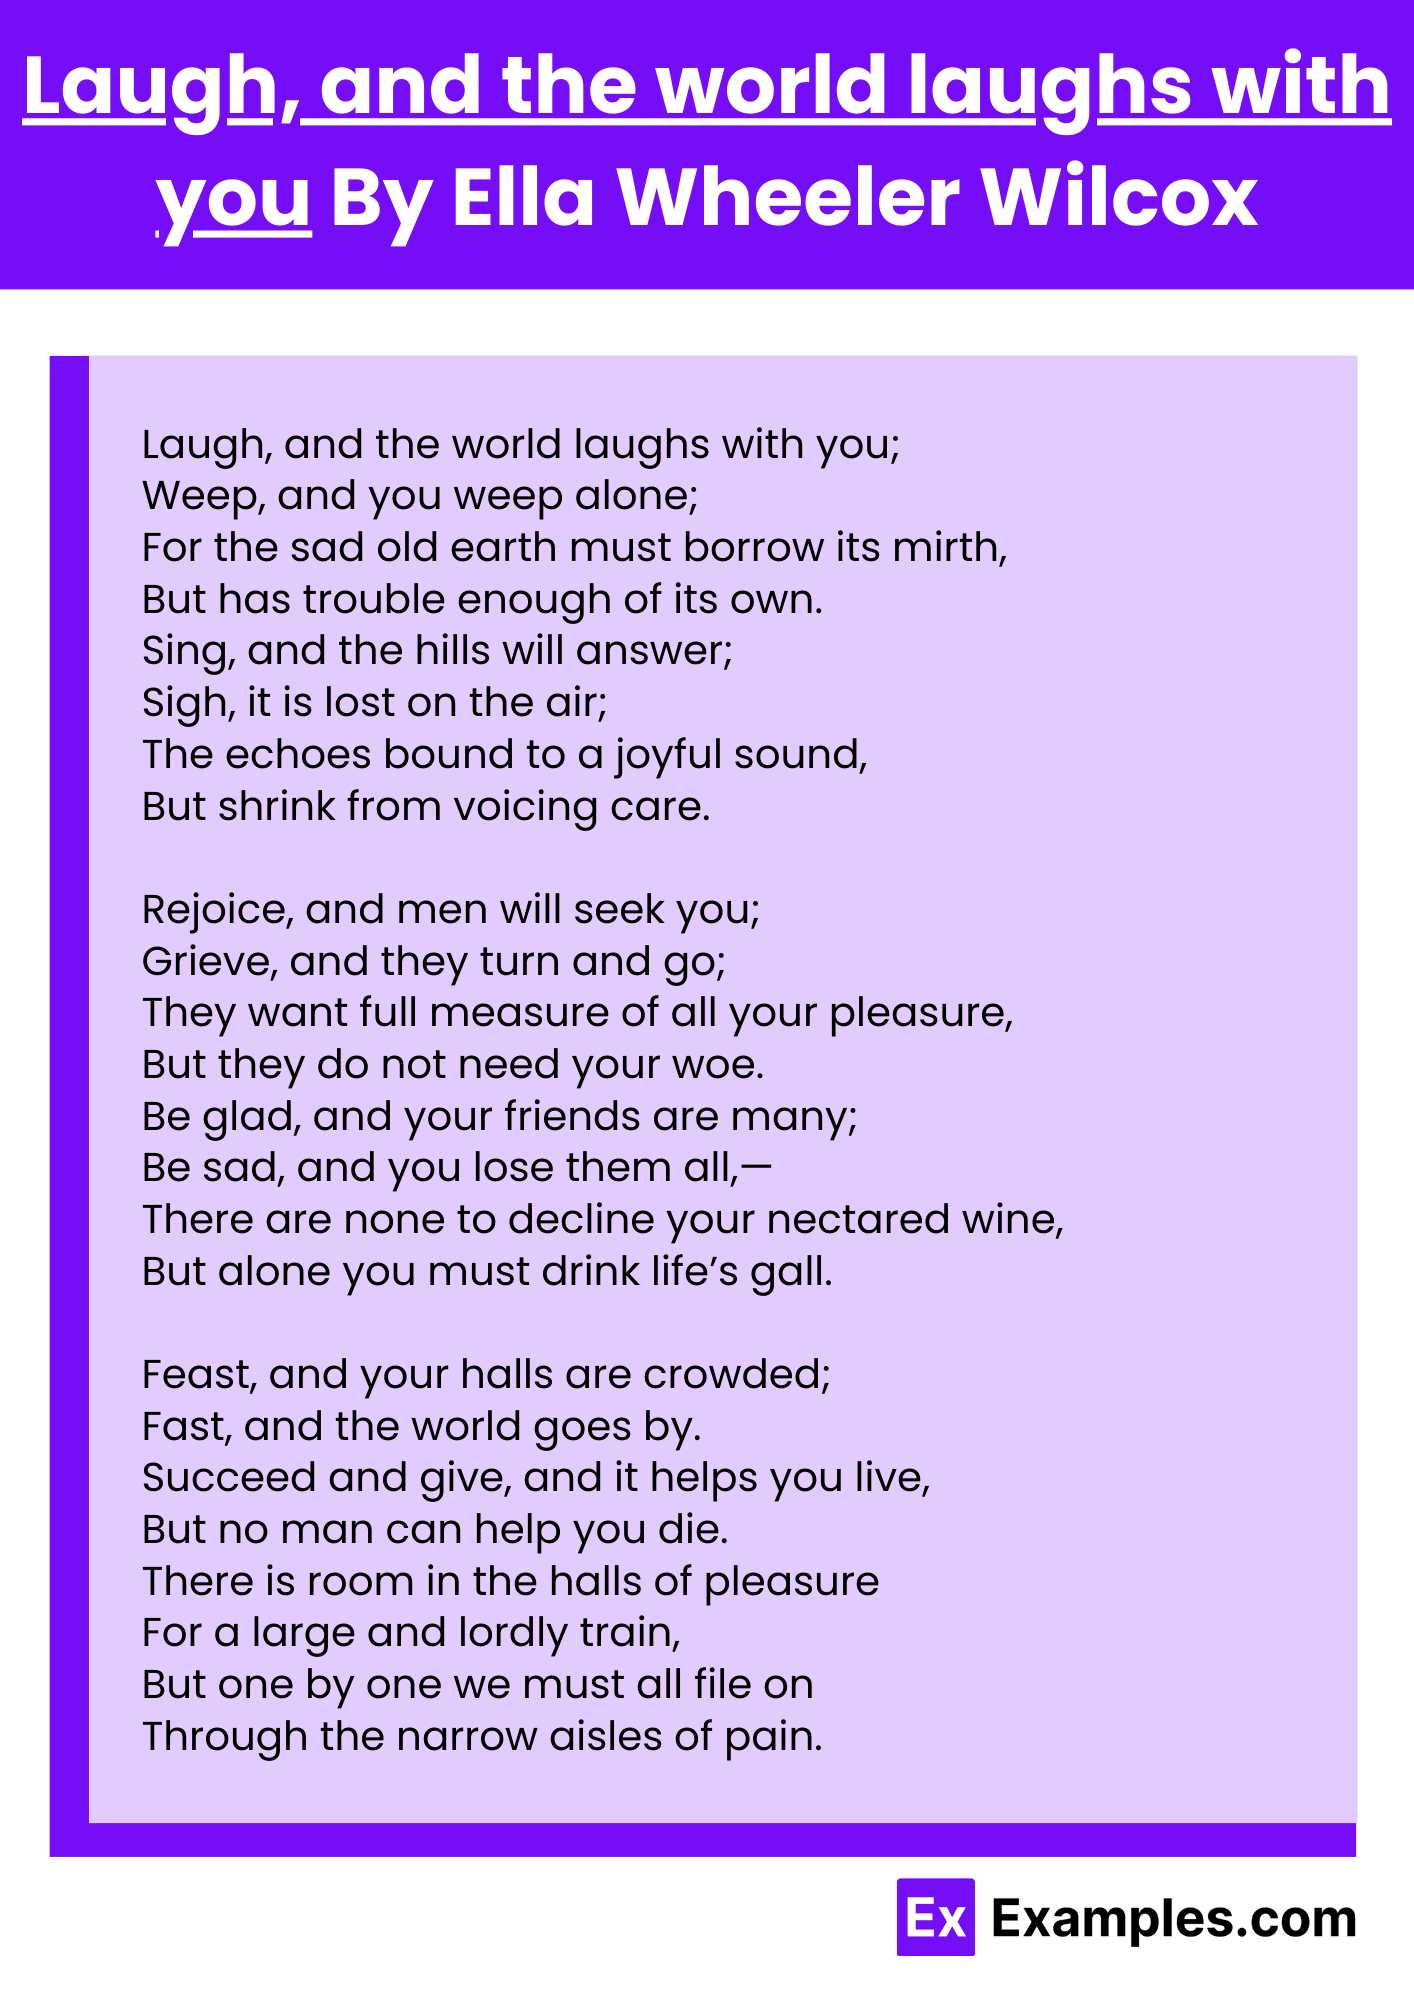 Laugh, and the world laughs with you By Ella Wheeler Wilcox